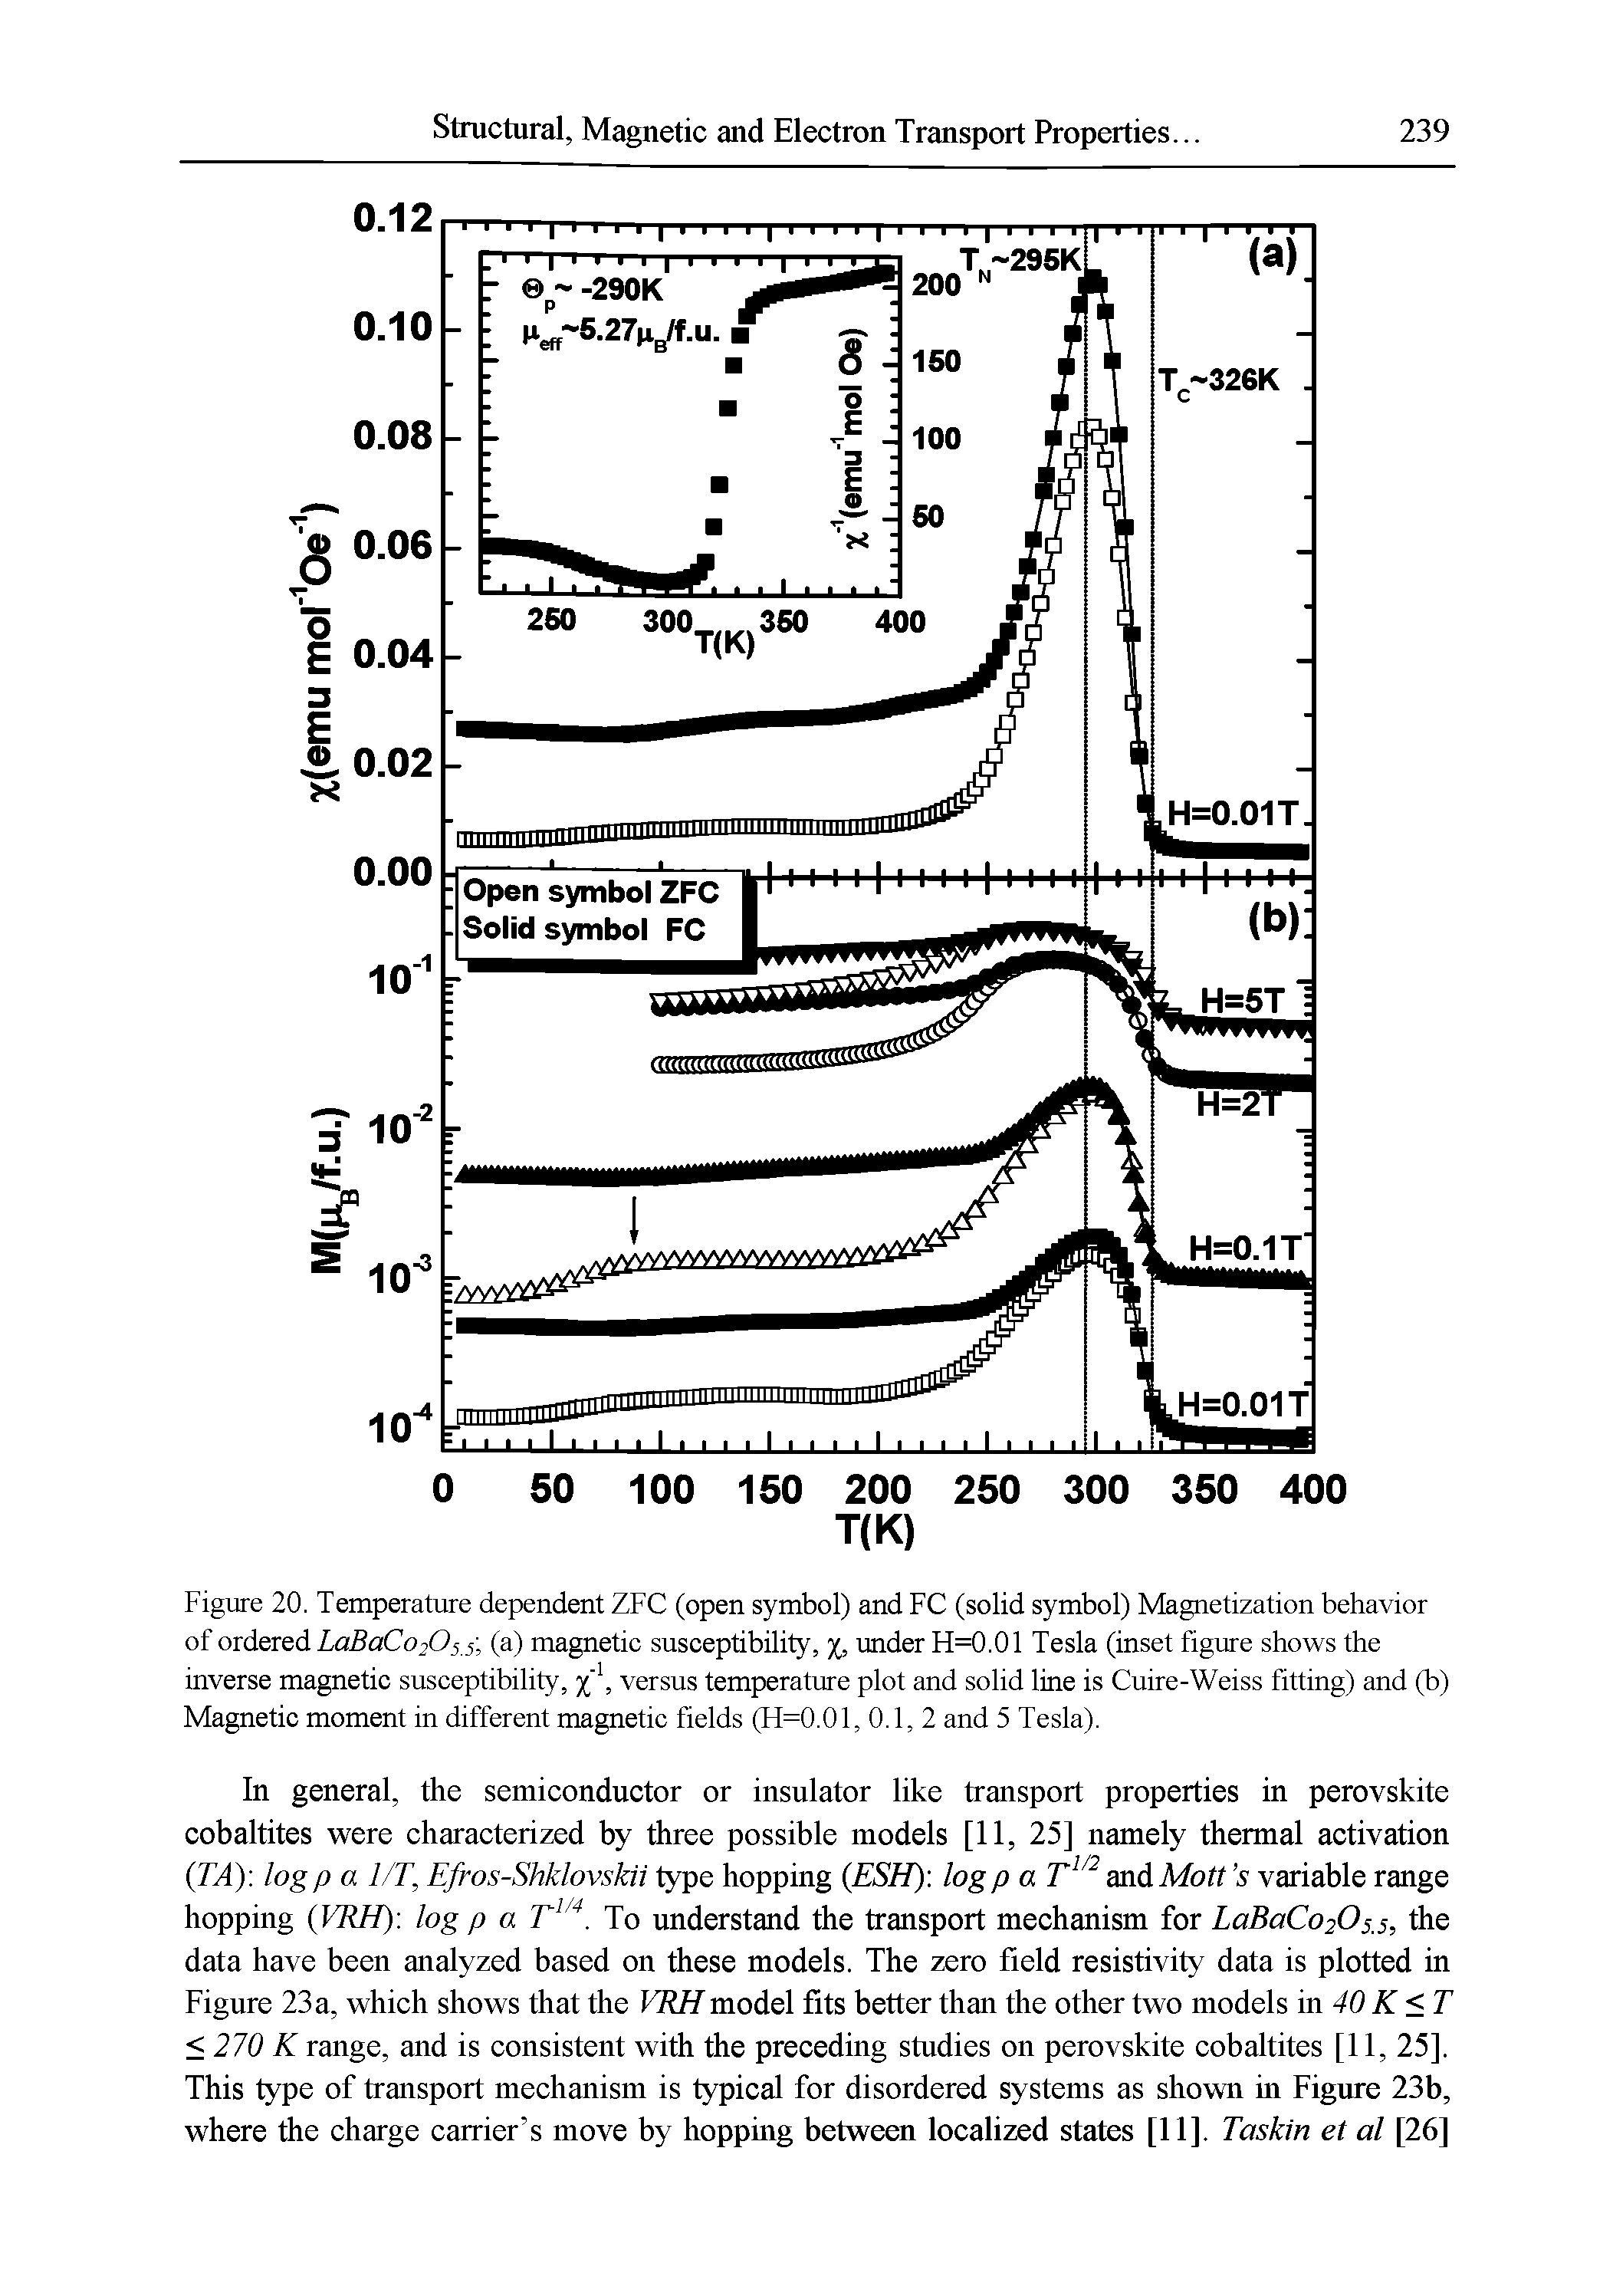 Figure 20. Temperature dependent ZFC (open symbol) and FC (solid symbol) Magnetization behavior of ordered LaBaCofisS, (a) magnetic susceptibility, %, under H=0.01 Tesla (inset figure shows the inverse magnetic susceptibility, versus temperature plot and solid line is Curre-Weiss fitting) and (b) Magnetic moment in different magnetic fields (H=0.01, 0.1, 2 and 5 Tesla).